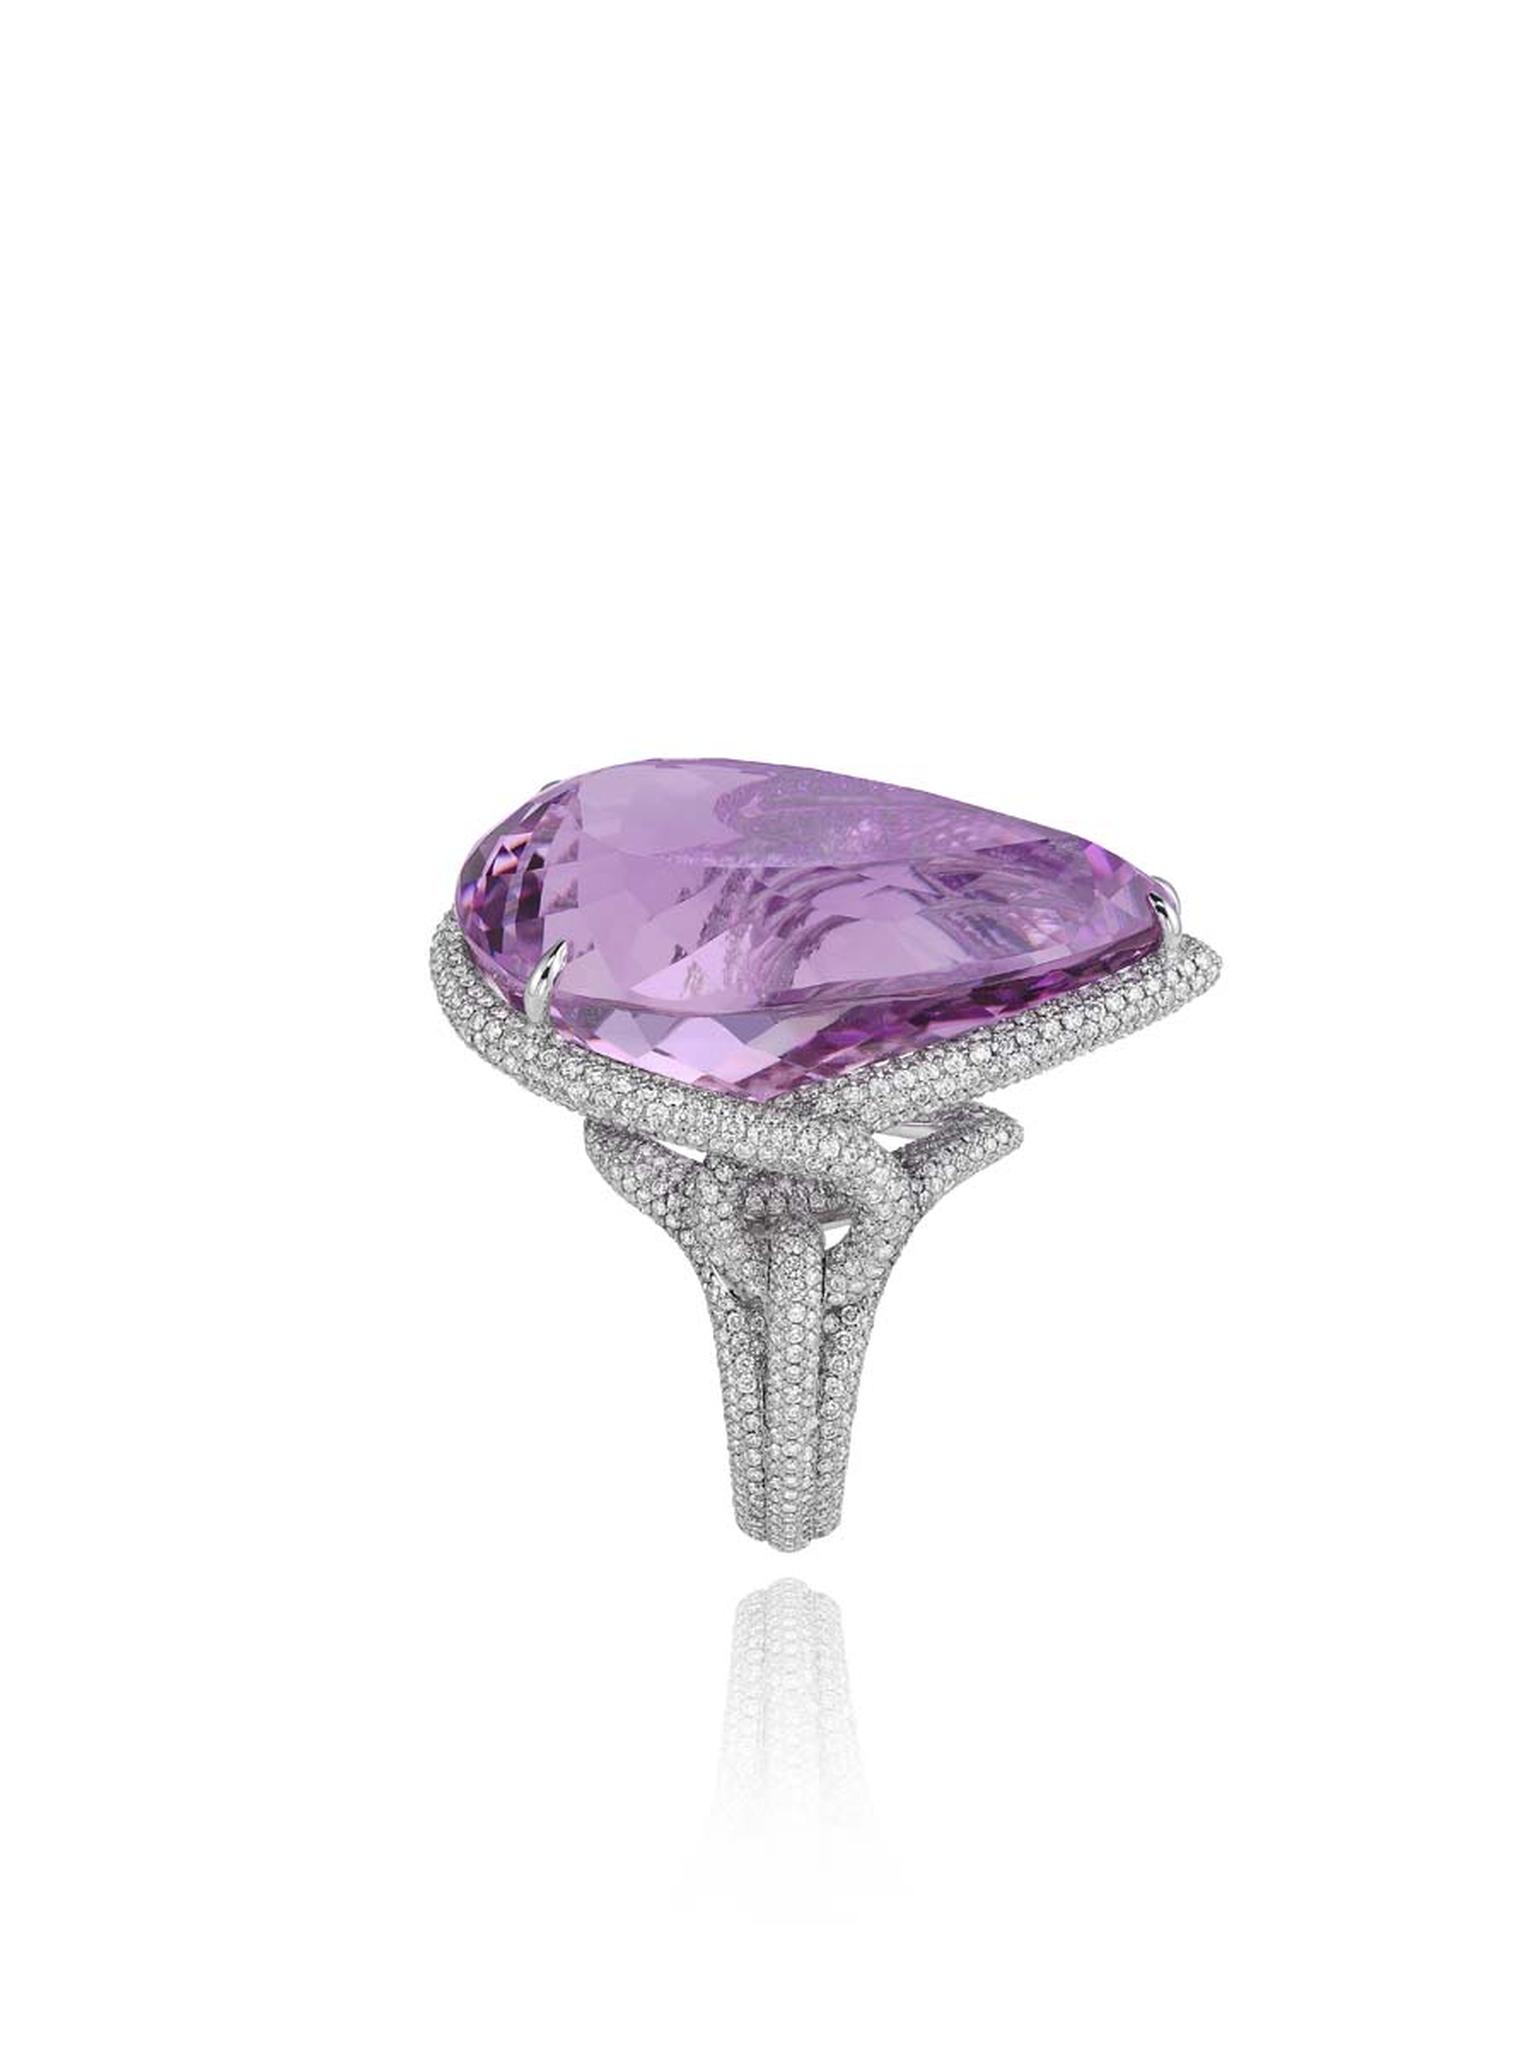 829174-1002 Kunzite Ring  from the Red Carpet Collection 2013Chopard.jpg